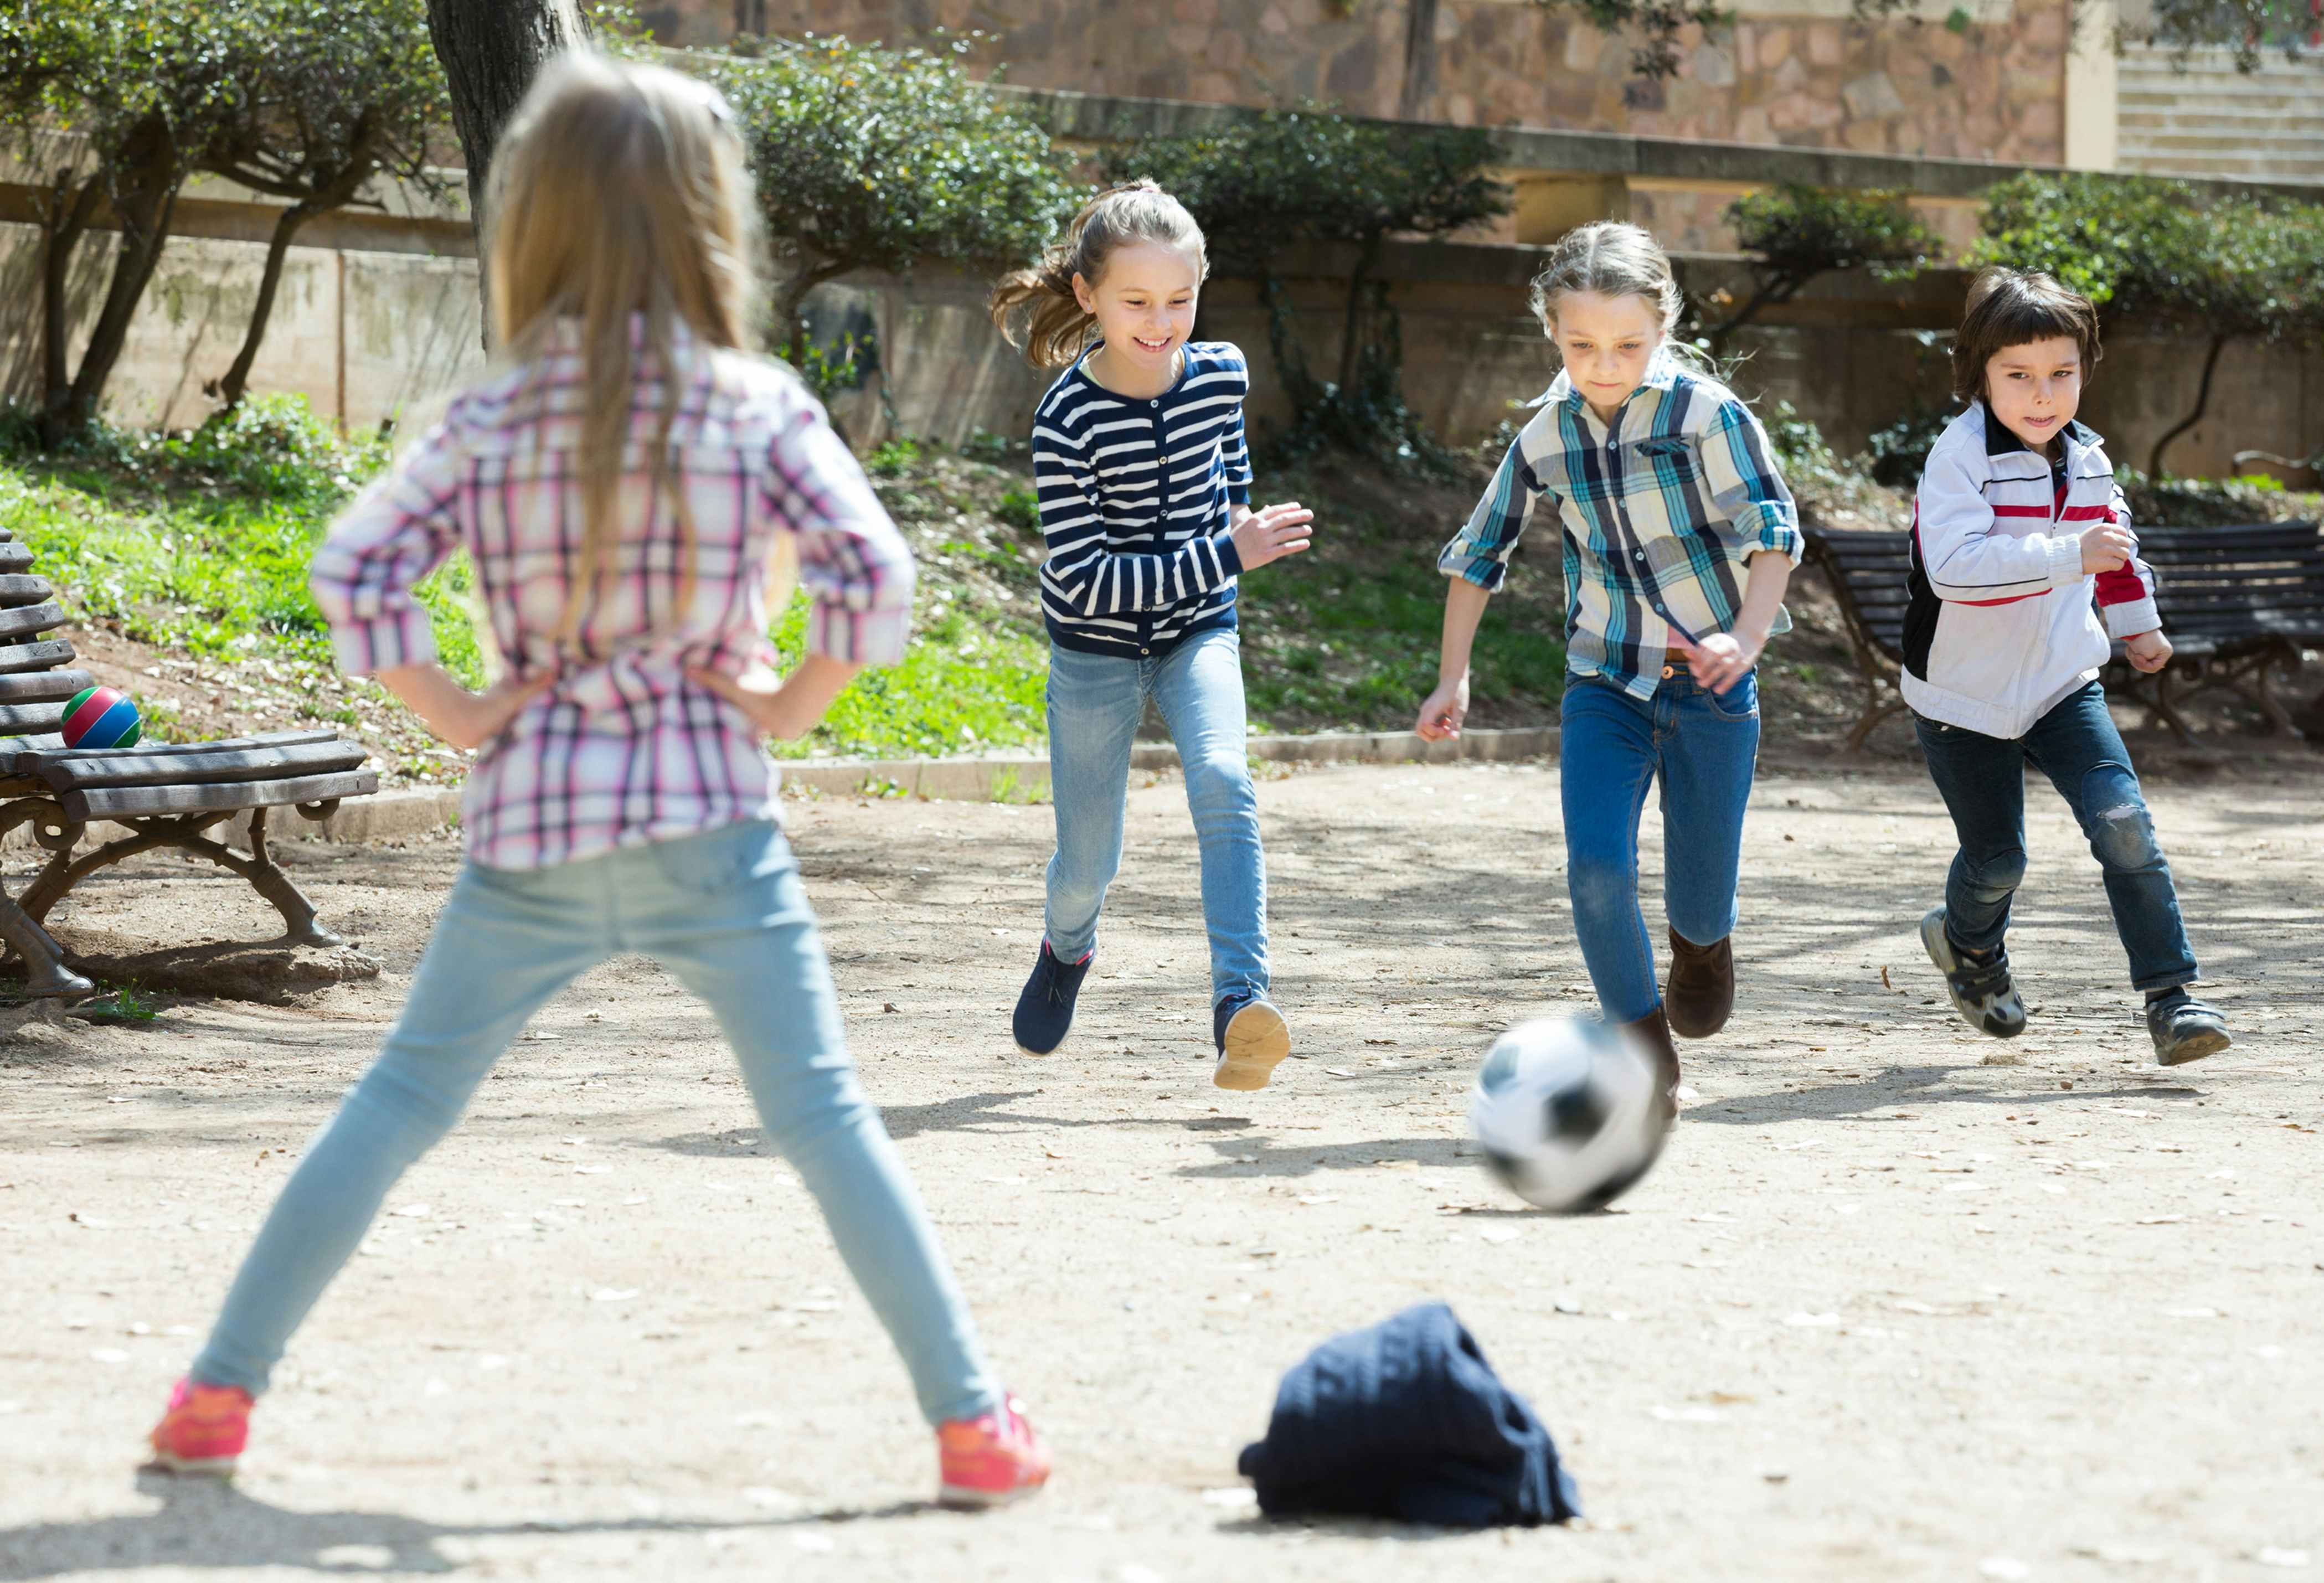 Kids playing with a soccer ball in a park